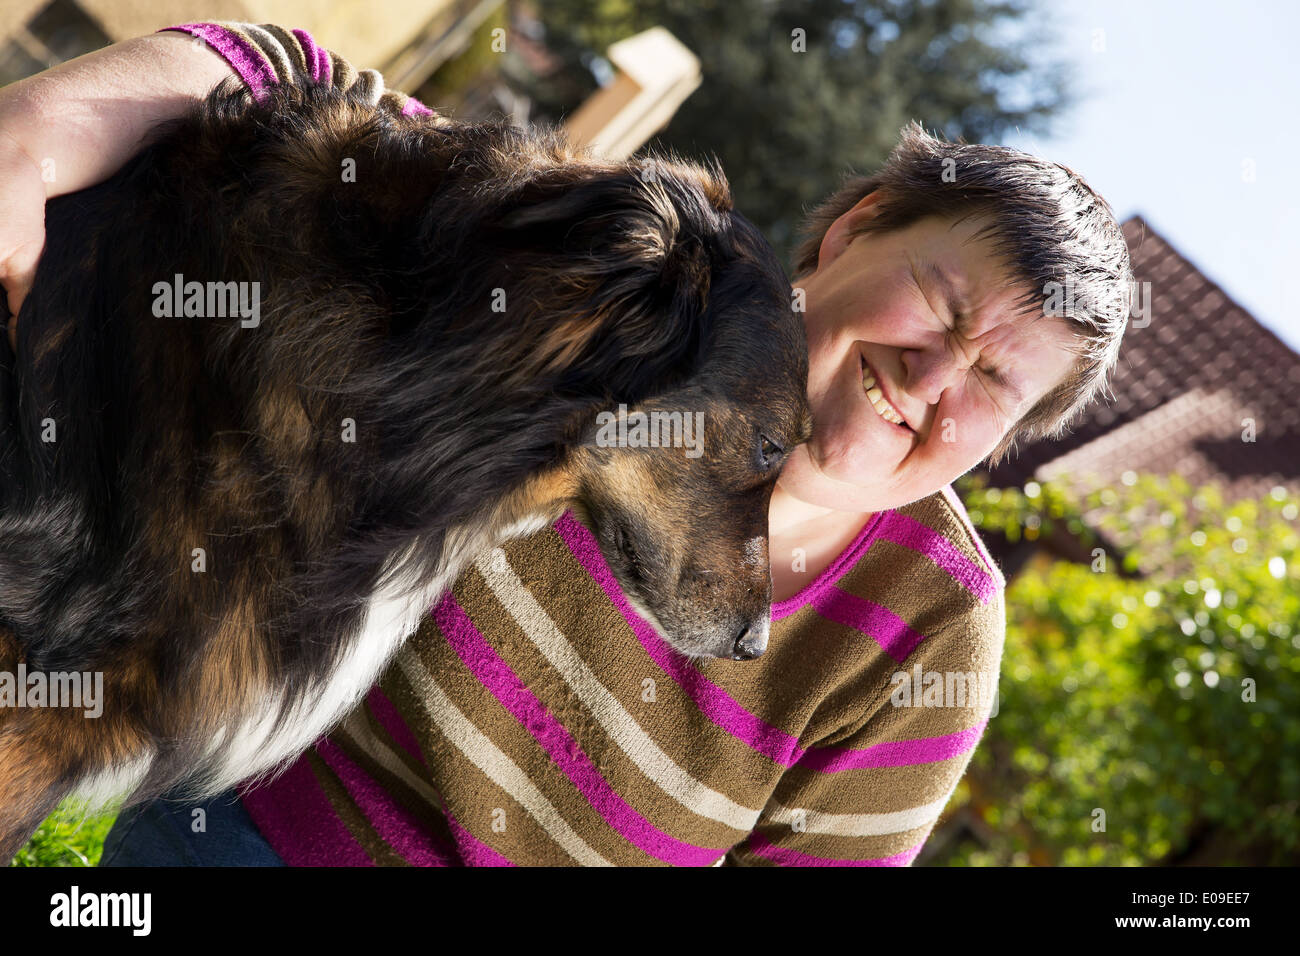 disabled woman sitting outdoors with an half breed dog Stock Photo